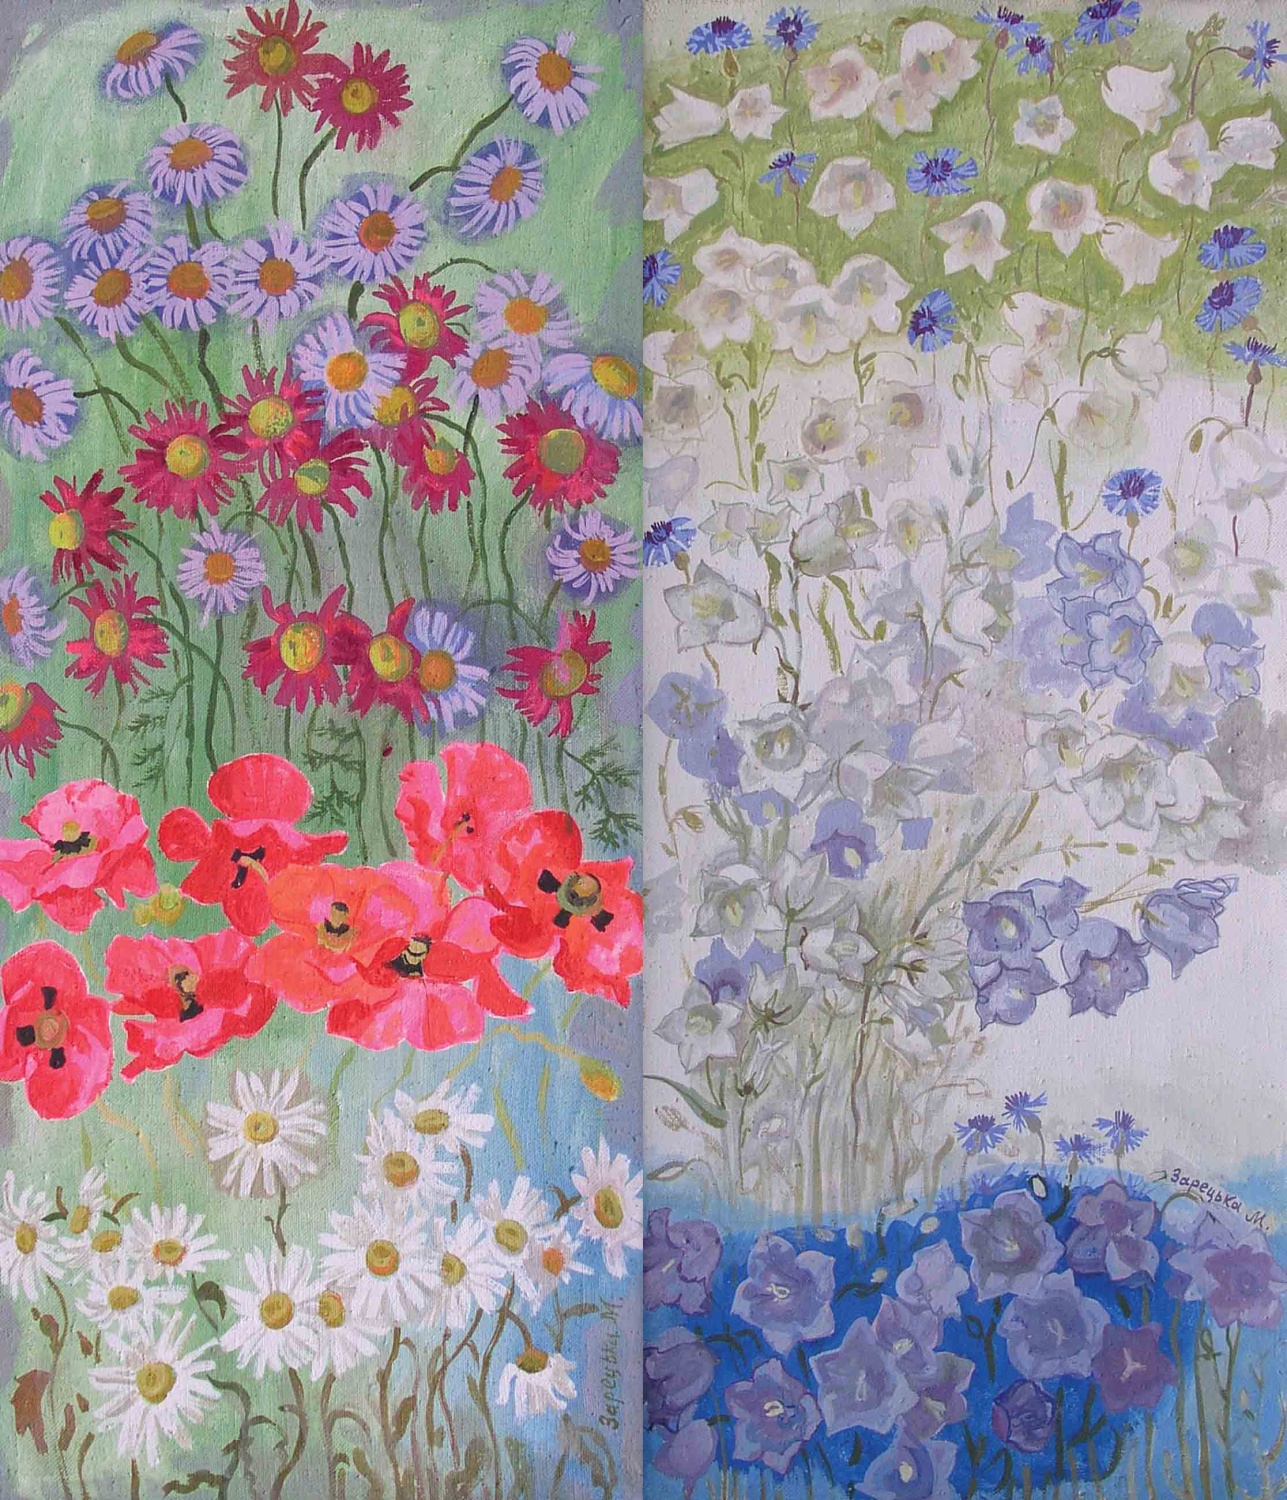 "Daisies and poppies", "Bells and cornflowers", 1990